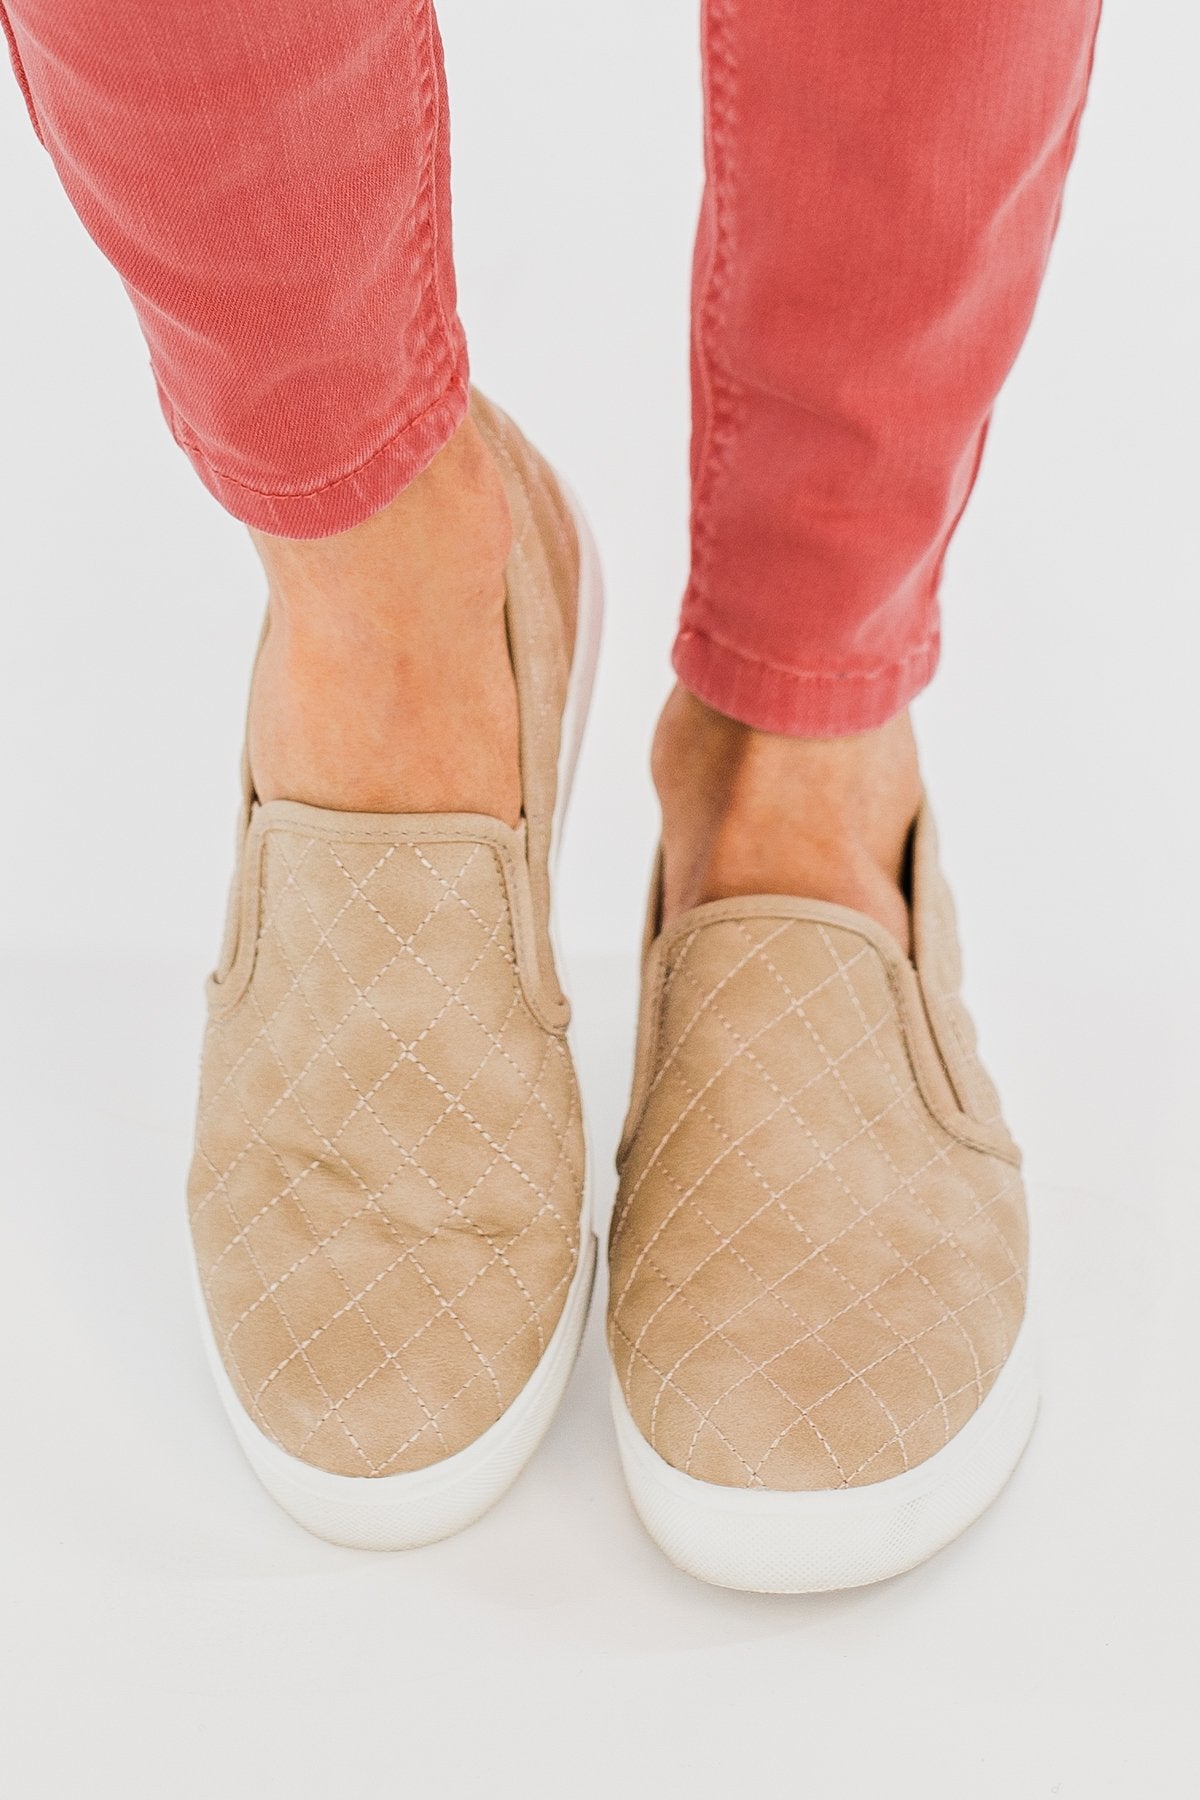 Soda Alone Slip On Sneakers- Taupe